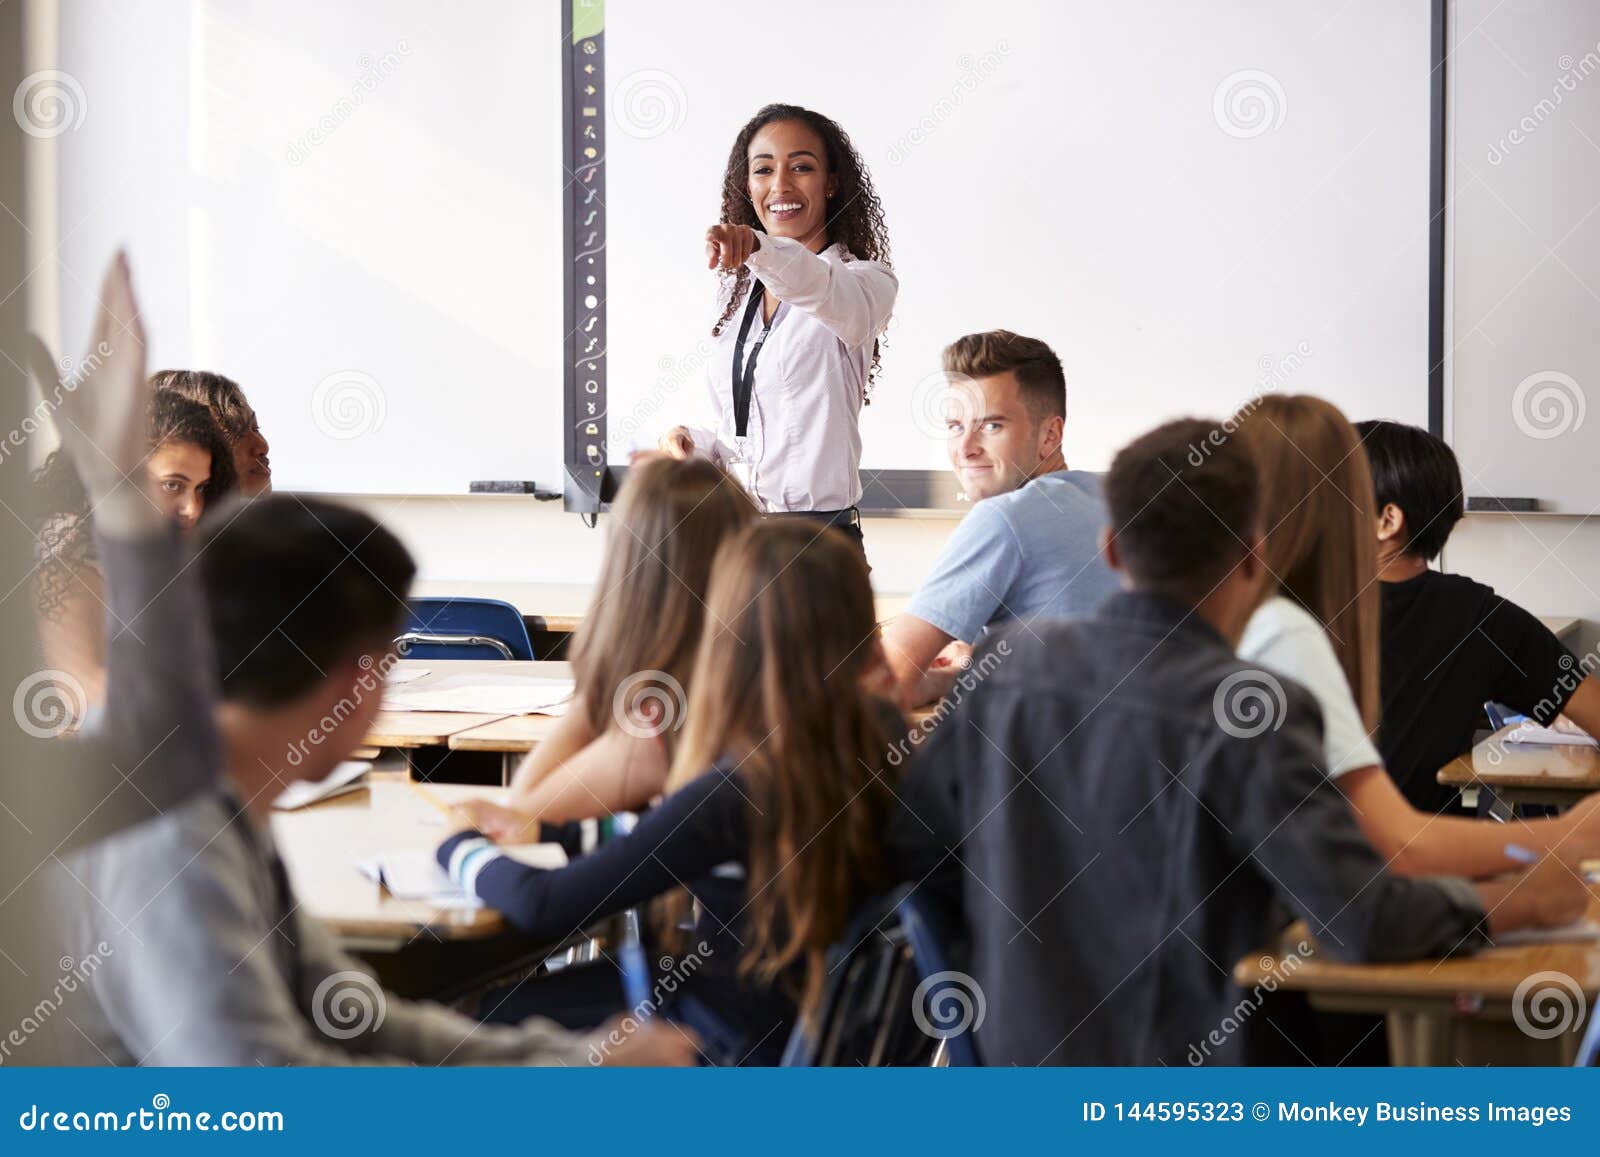 female high school teacher asking question standing by interactive whiteboard teaching lesson